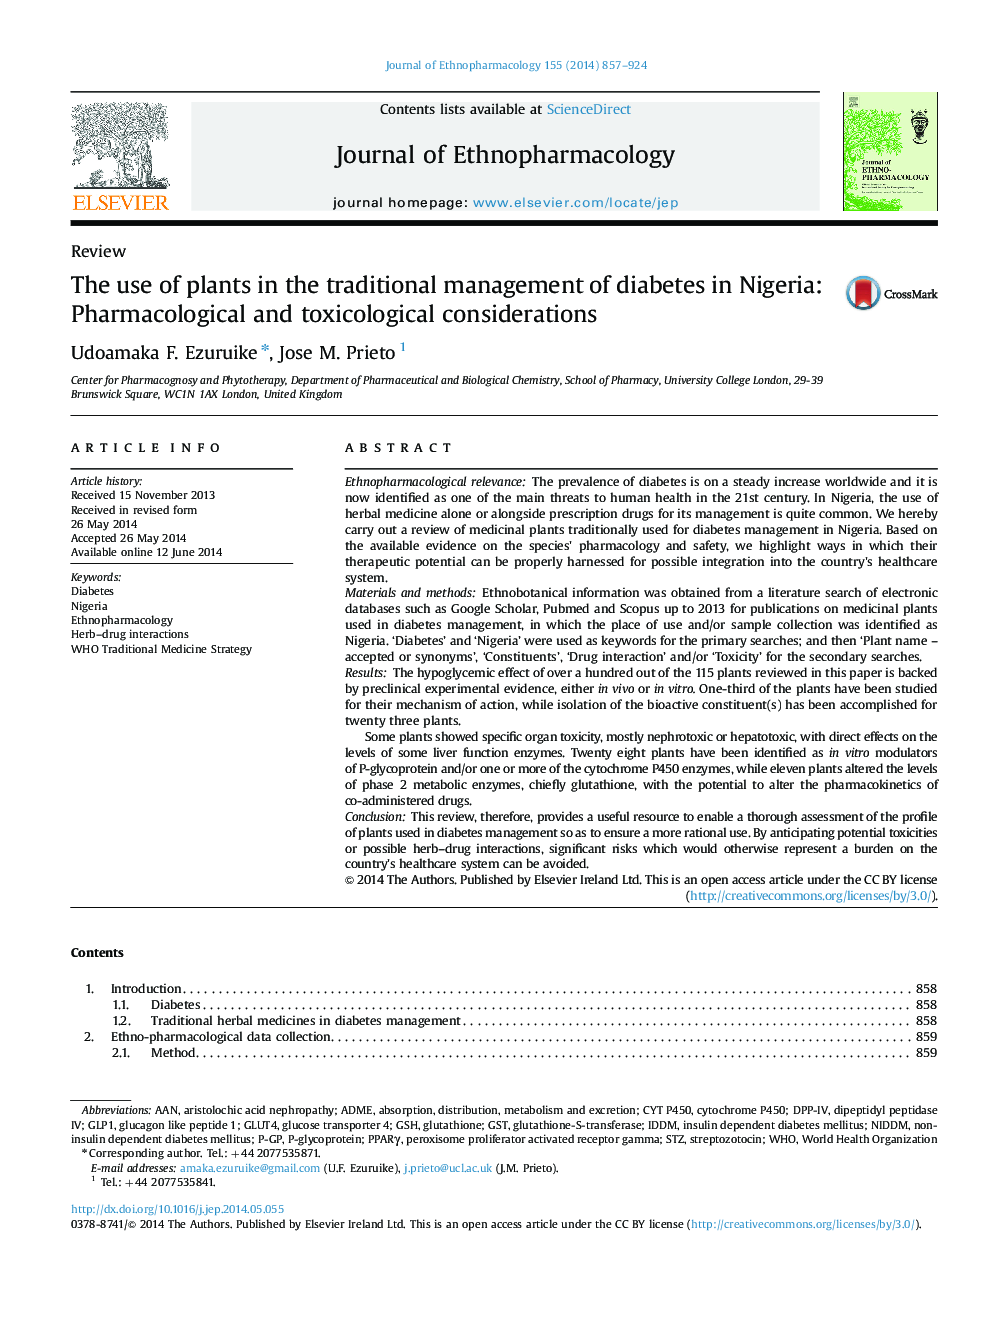 The use of plants in the traditional management of diabetes in Nigeria: Pharmacological and toxicological considerations